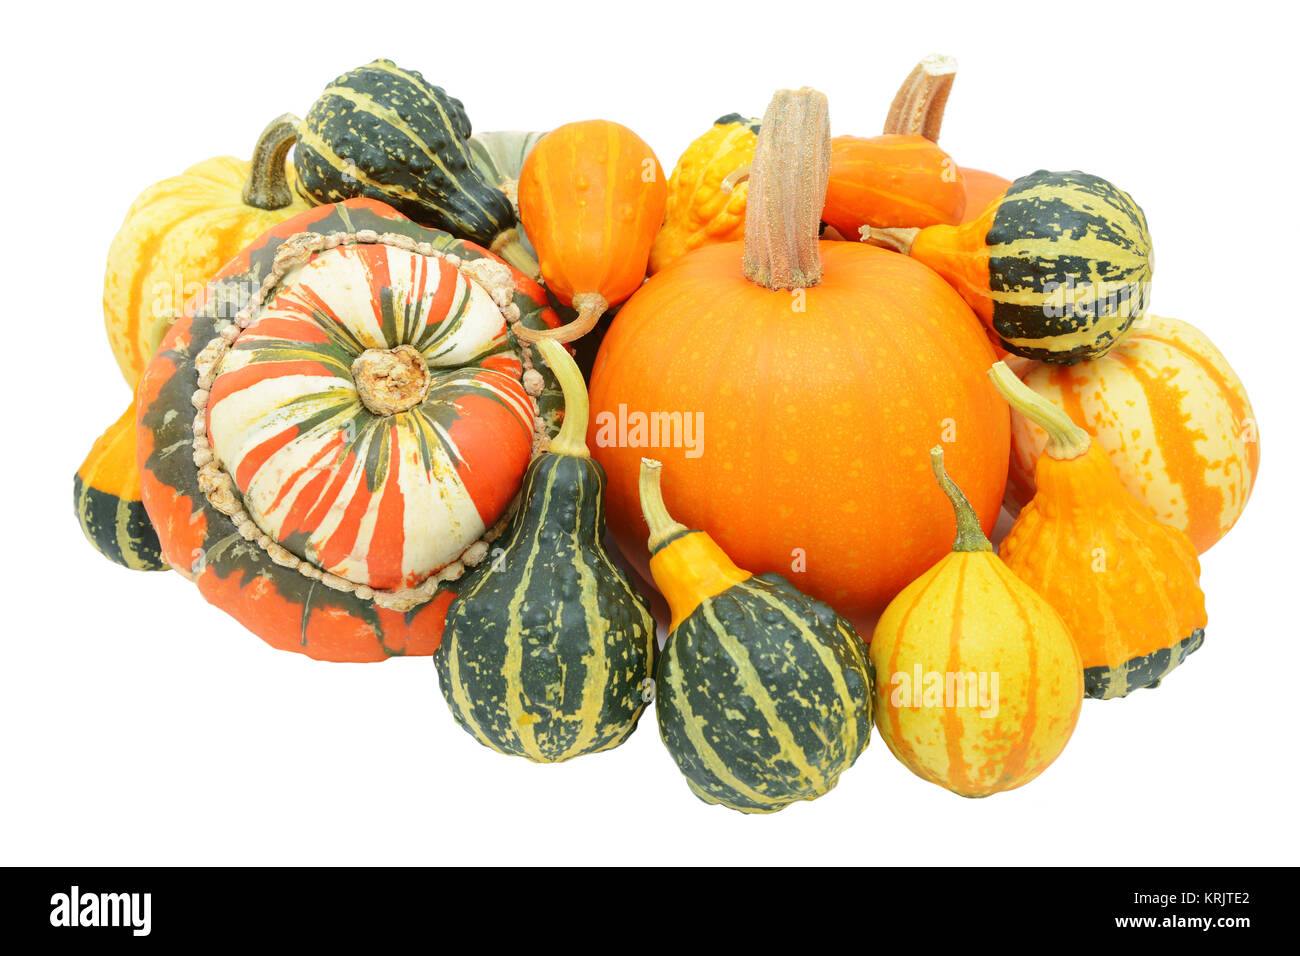 Group of autumnal gourds - pumpkins, turban squash and ornamentals Stock Photo